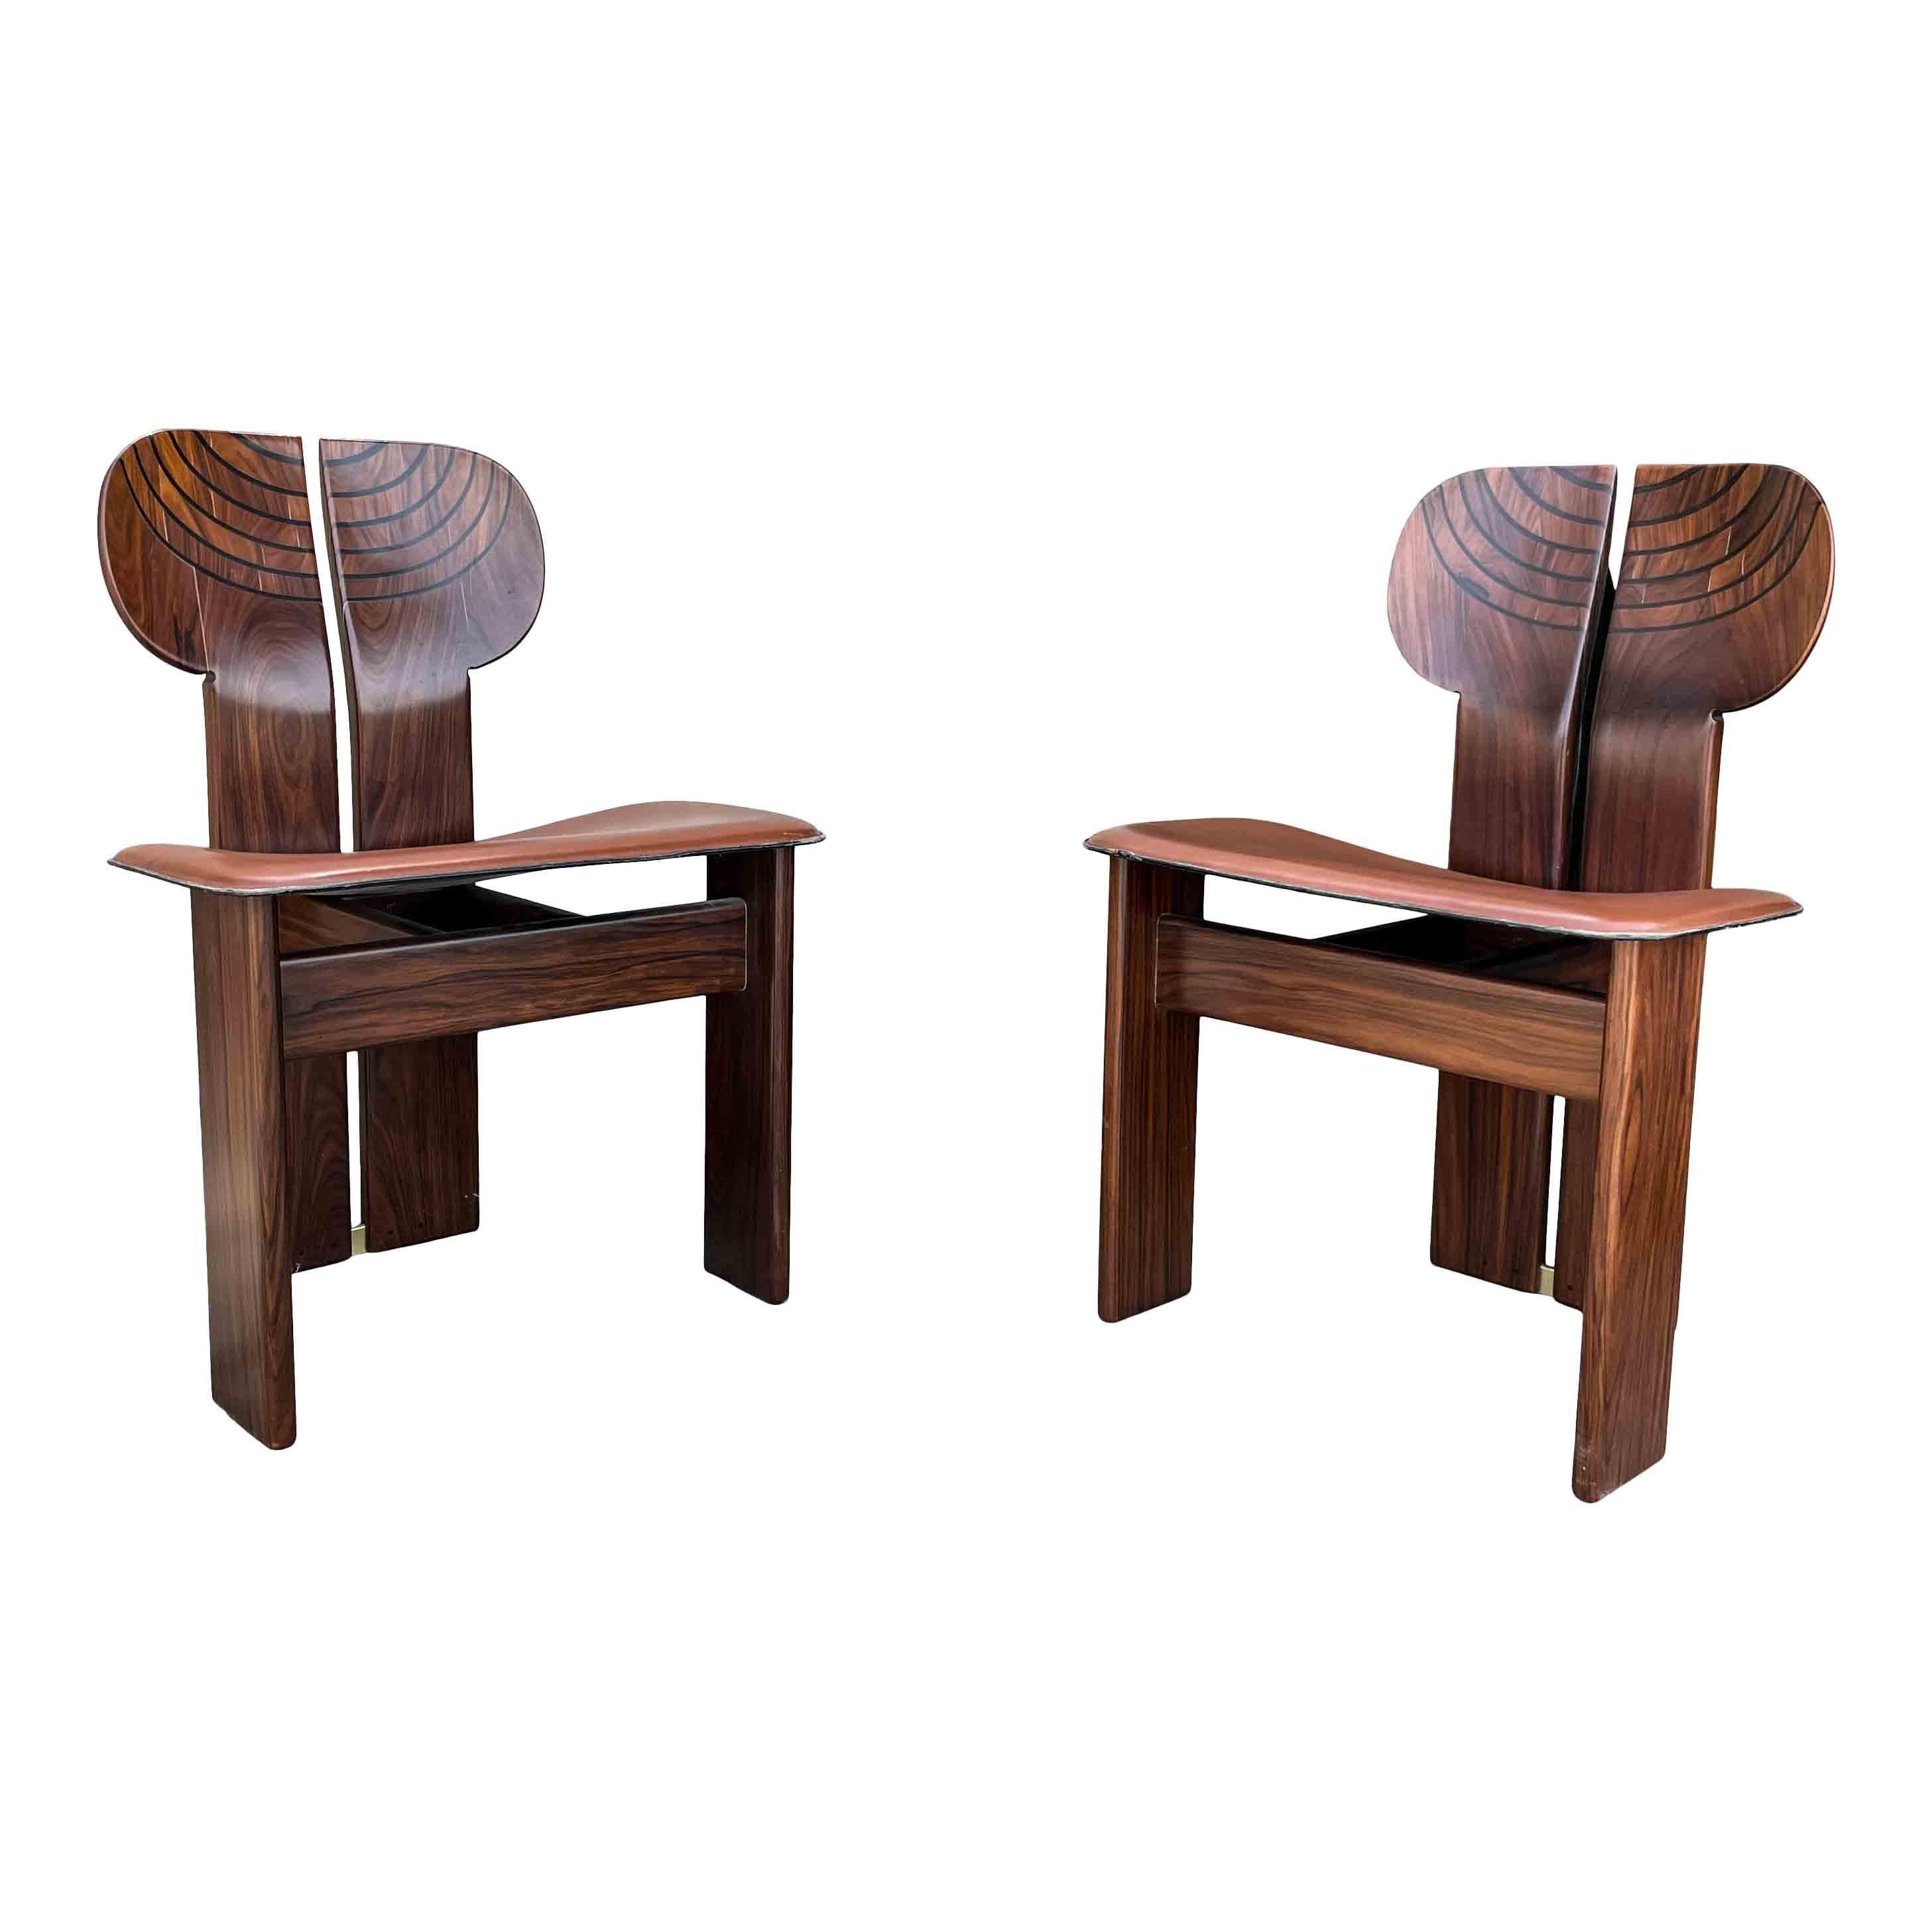 Italian Afra & Tobia Scarpa Africa Dining Room Set for Maxalto, 4 Chairs and Table, 1976 For Sale